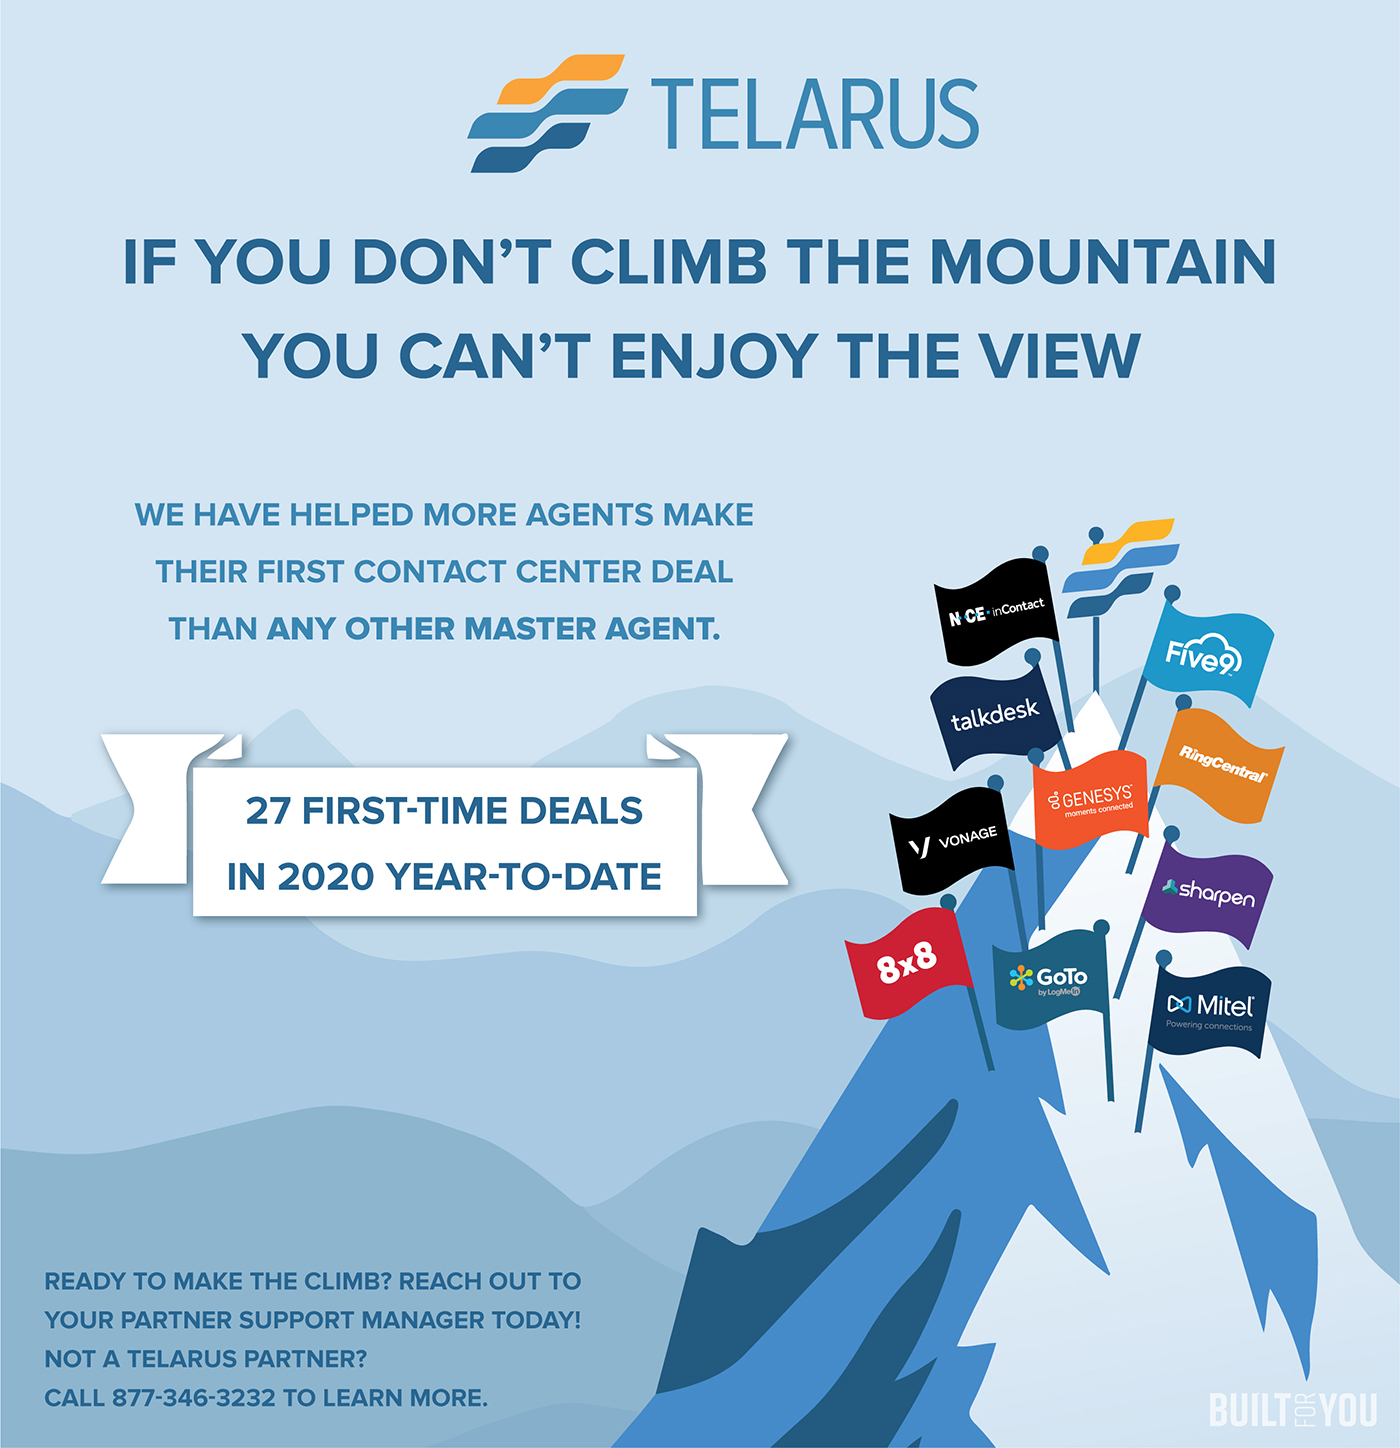 Telarus Has Helped More Agents Make Their First Contact Center Deal Than Any Other Master Agent